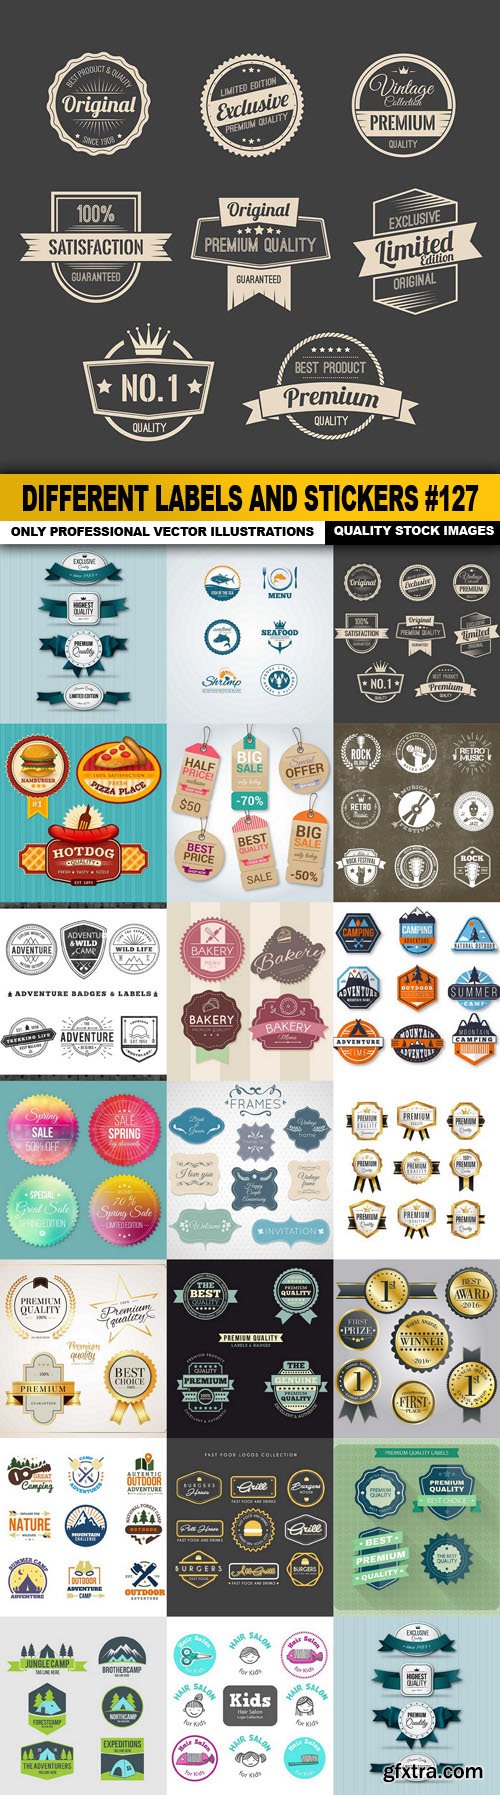 Different Labels And Stickers #127 - 20 Vector